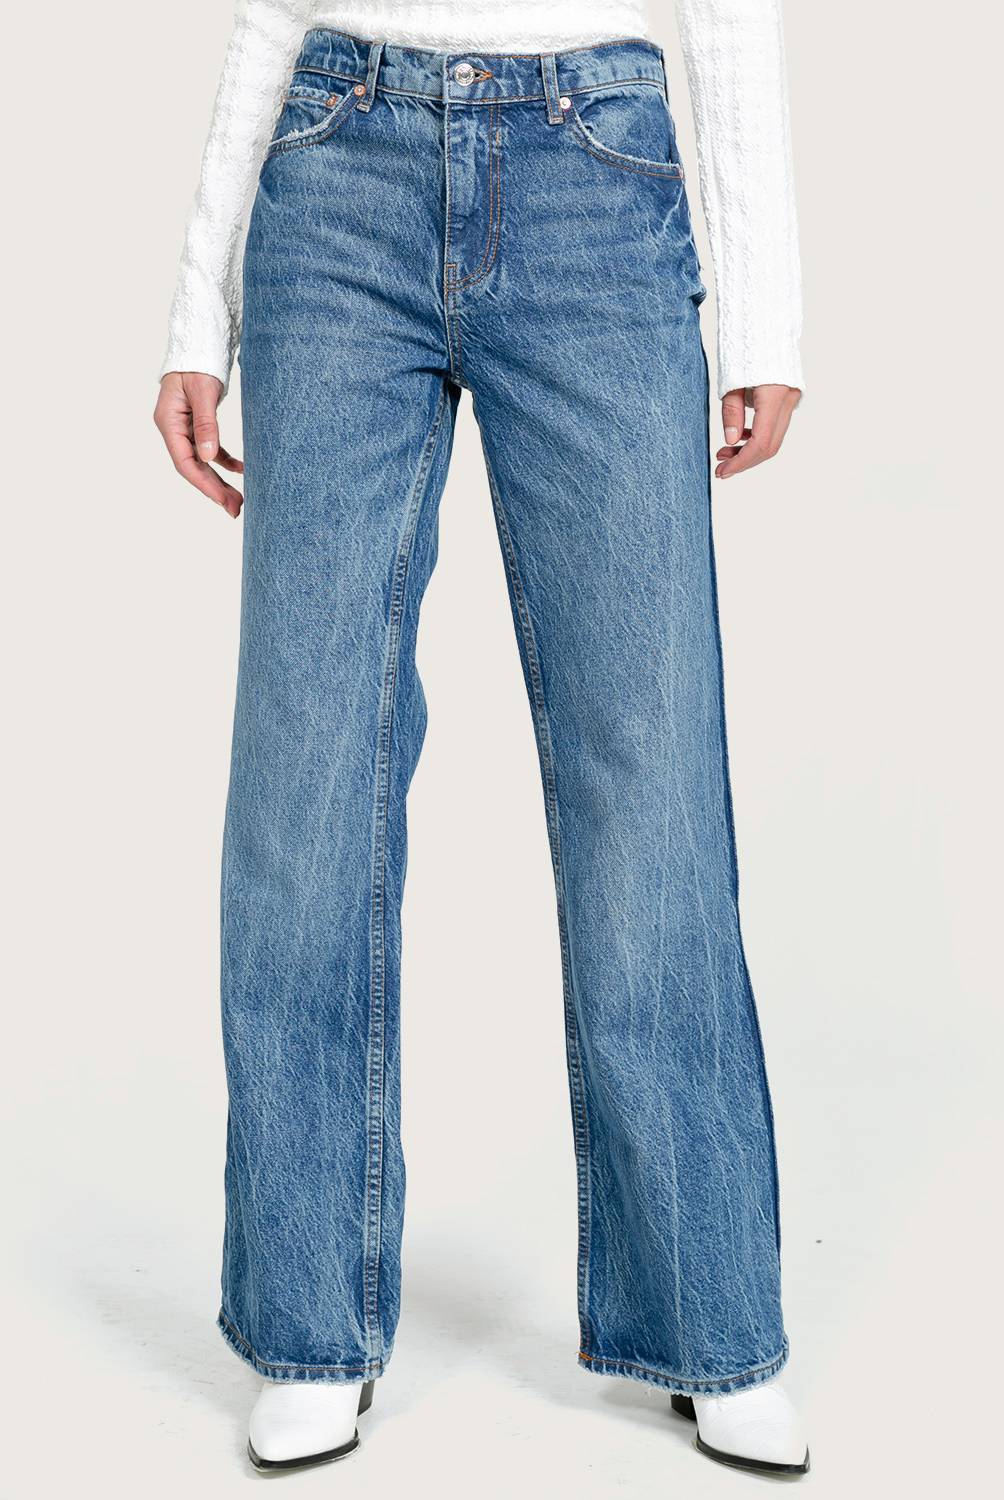 FREE PEOPLE - Jeans Mujer